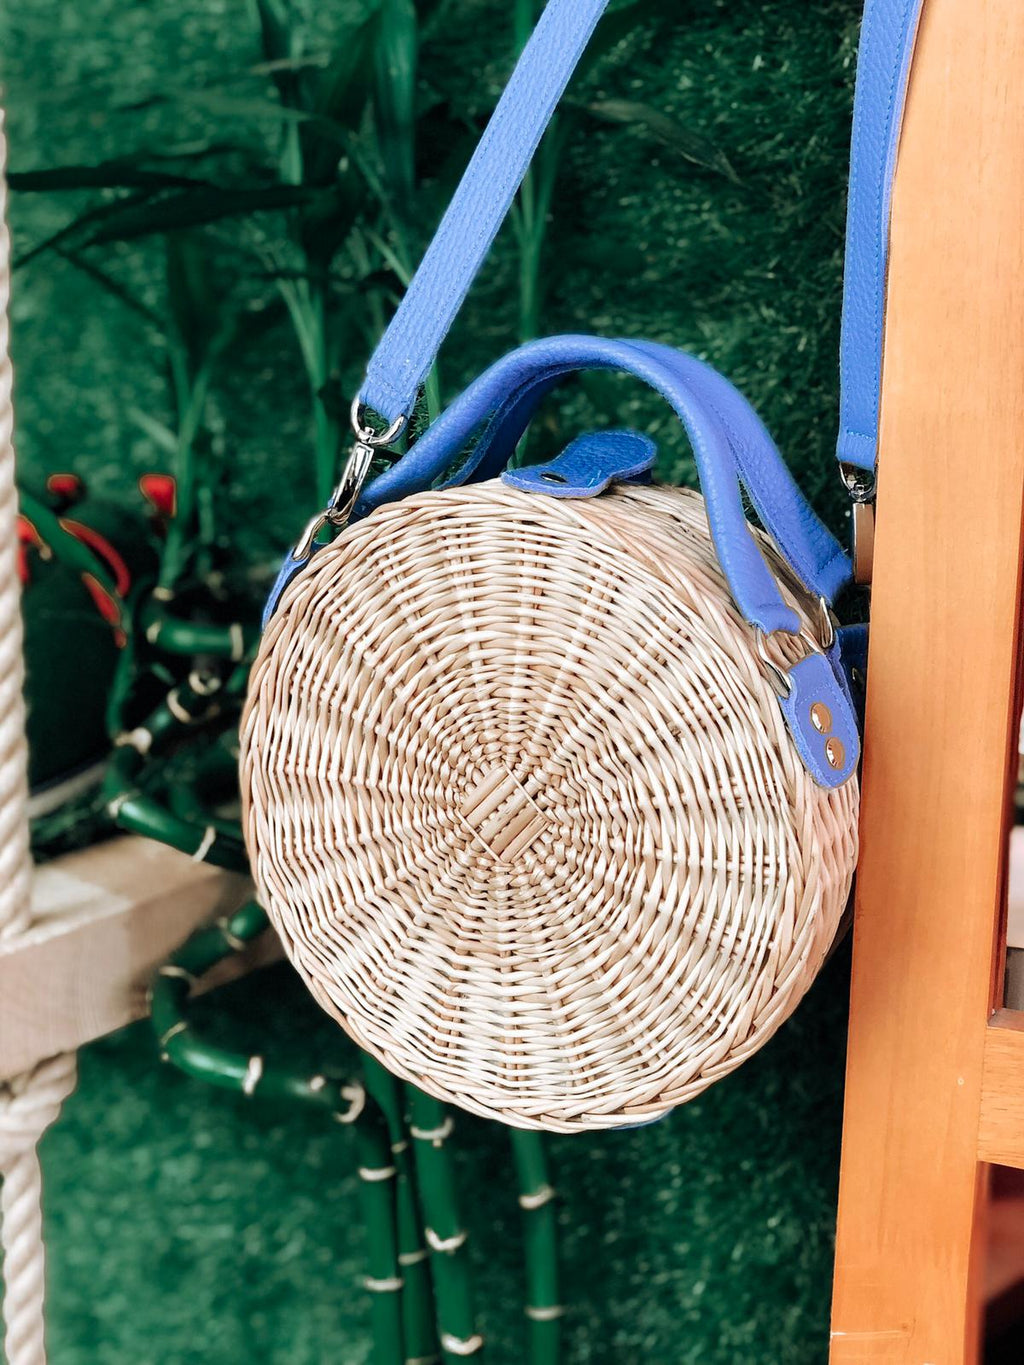 FORGET-ME-NOT STRAW bag